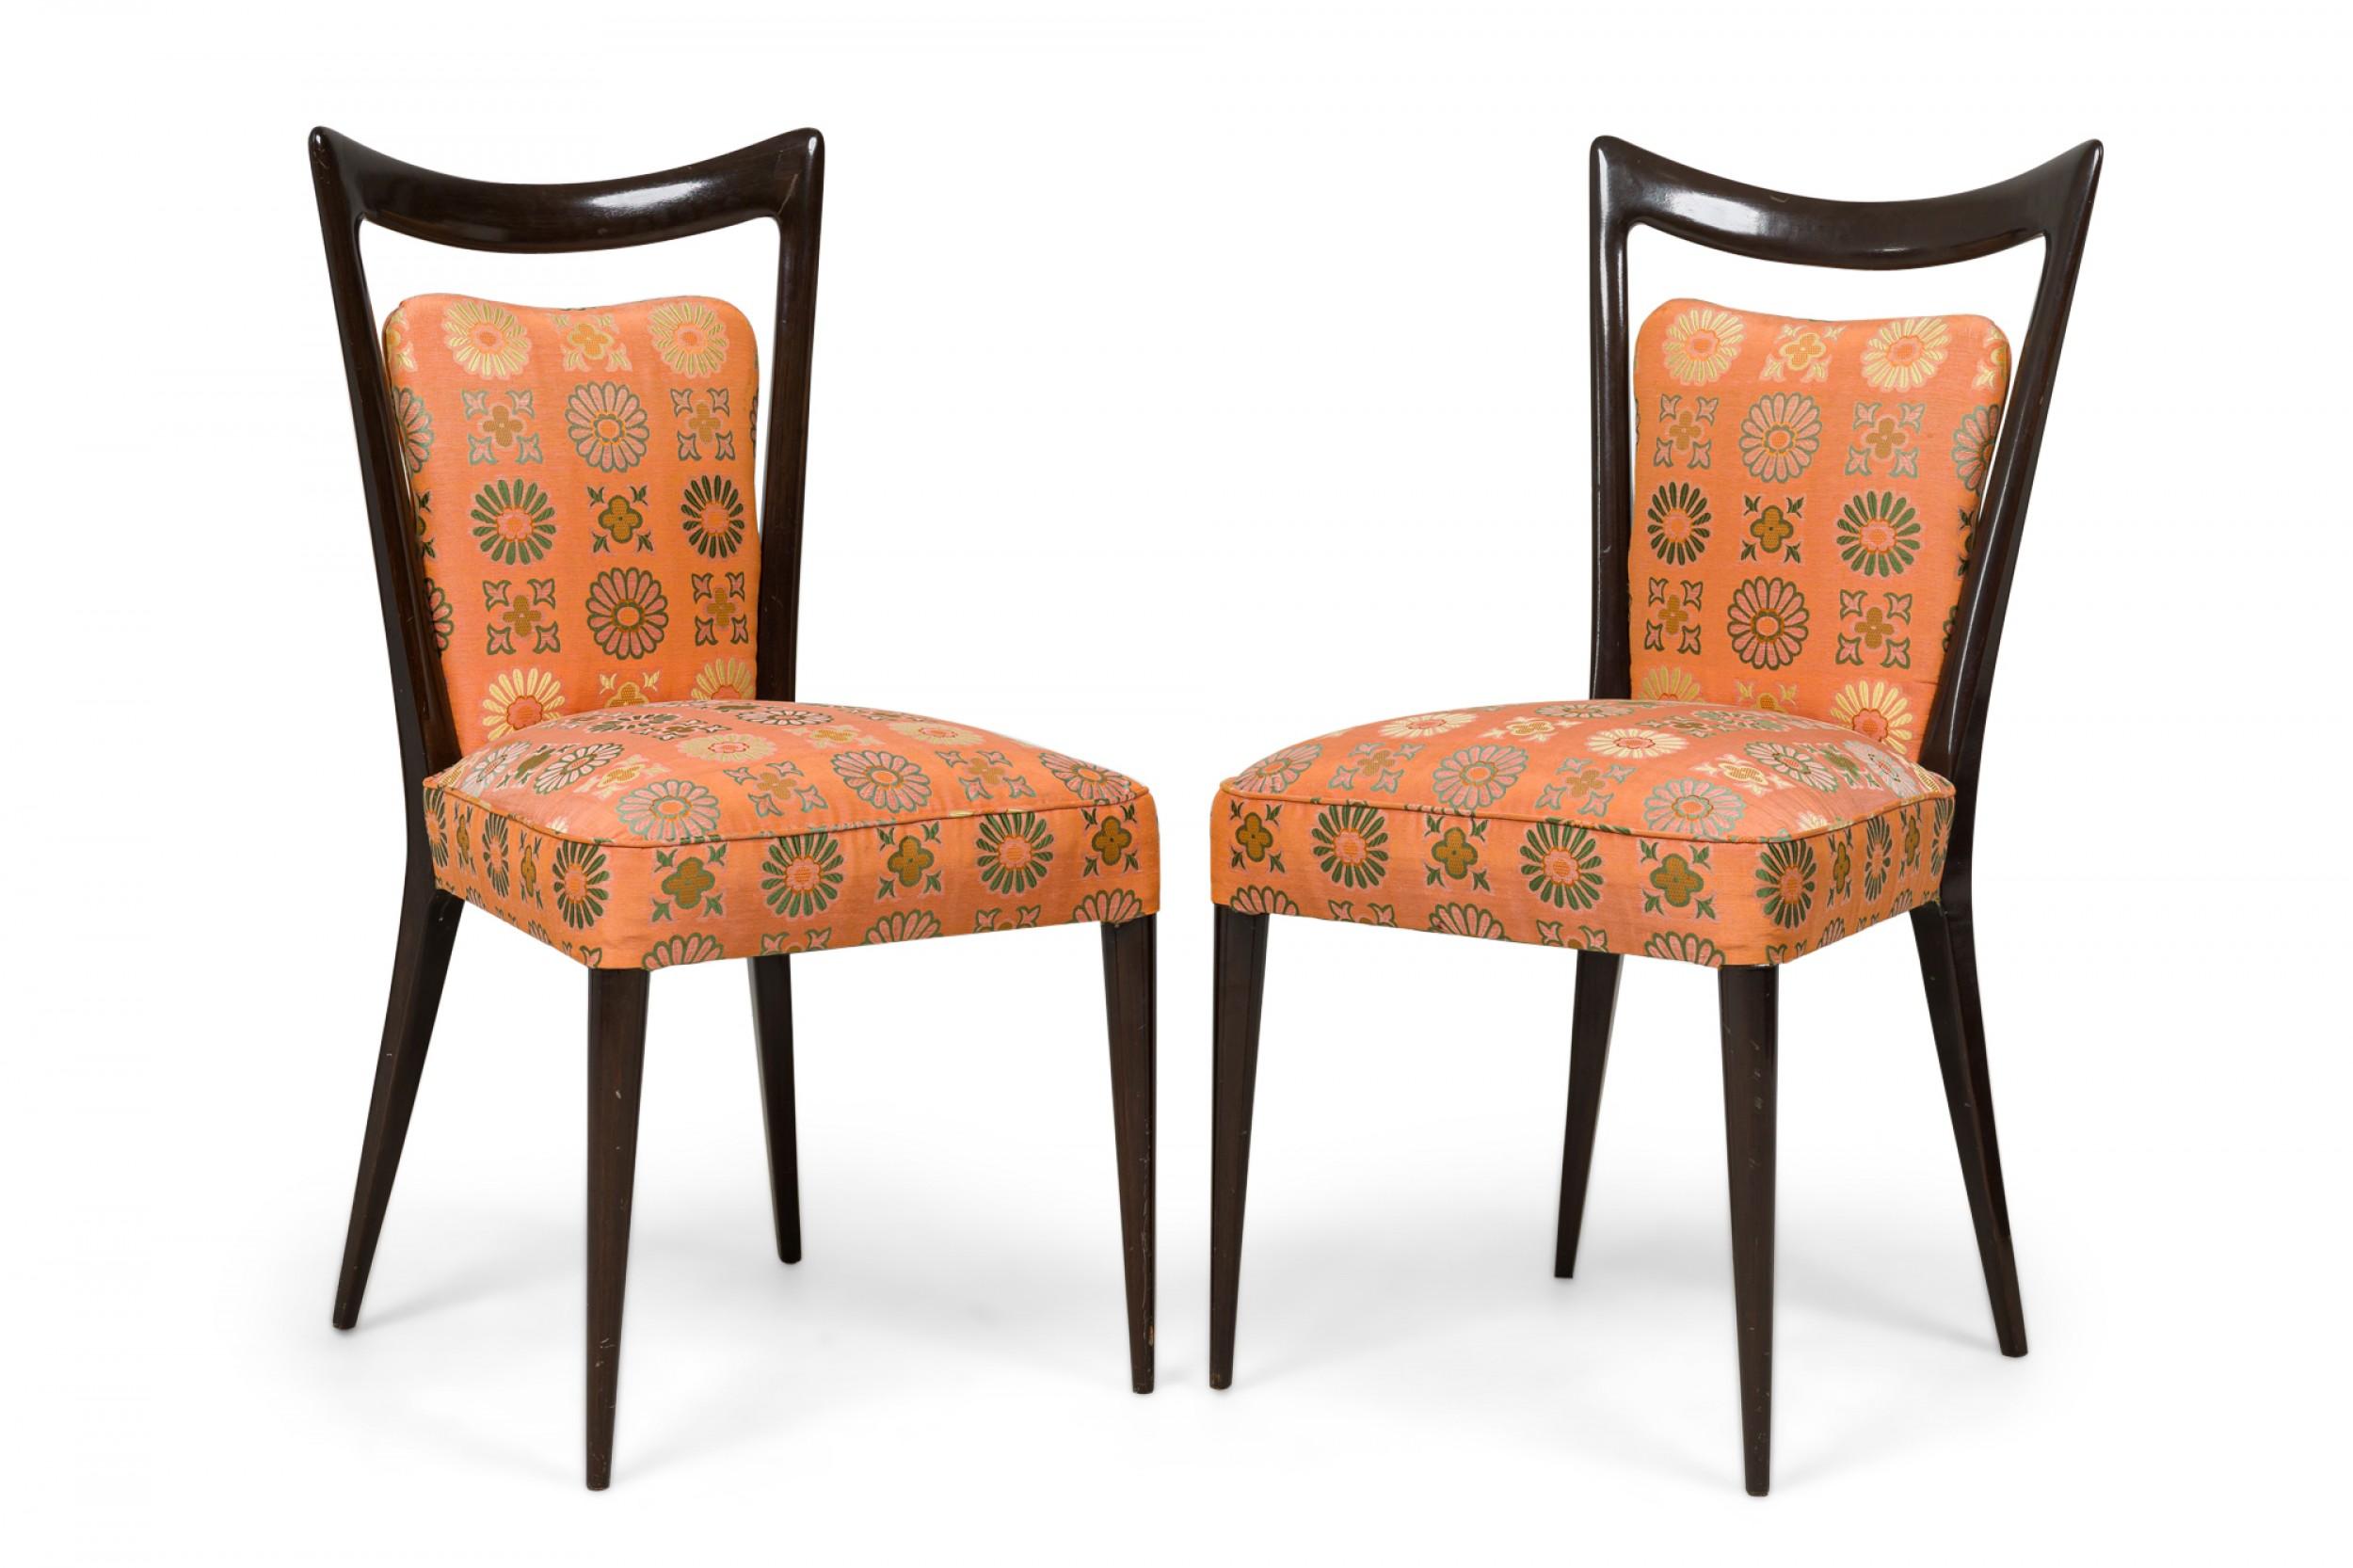 SET of 4 Mid-Century (1950s) Italian dining side chairs with molded backs, upholstered in a peach floral patterned fabric, standing on 4 tapered conical legs. (MELCHIORRE BEGA) (PRICED AS SET) (Similar chairs: REG4090B)
